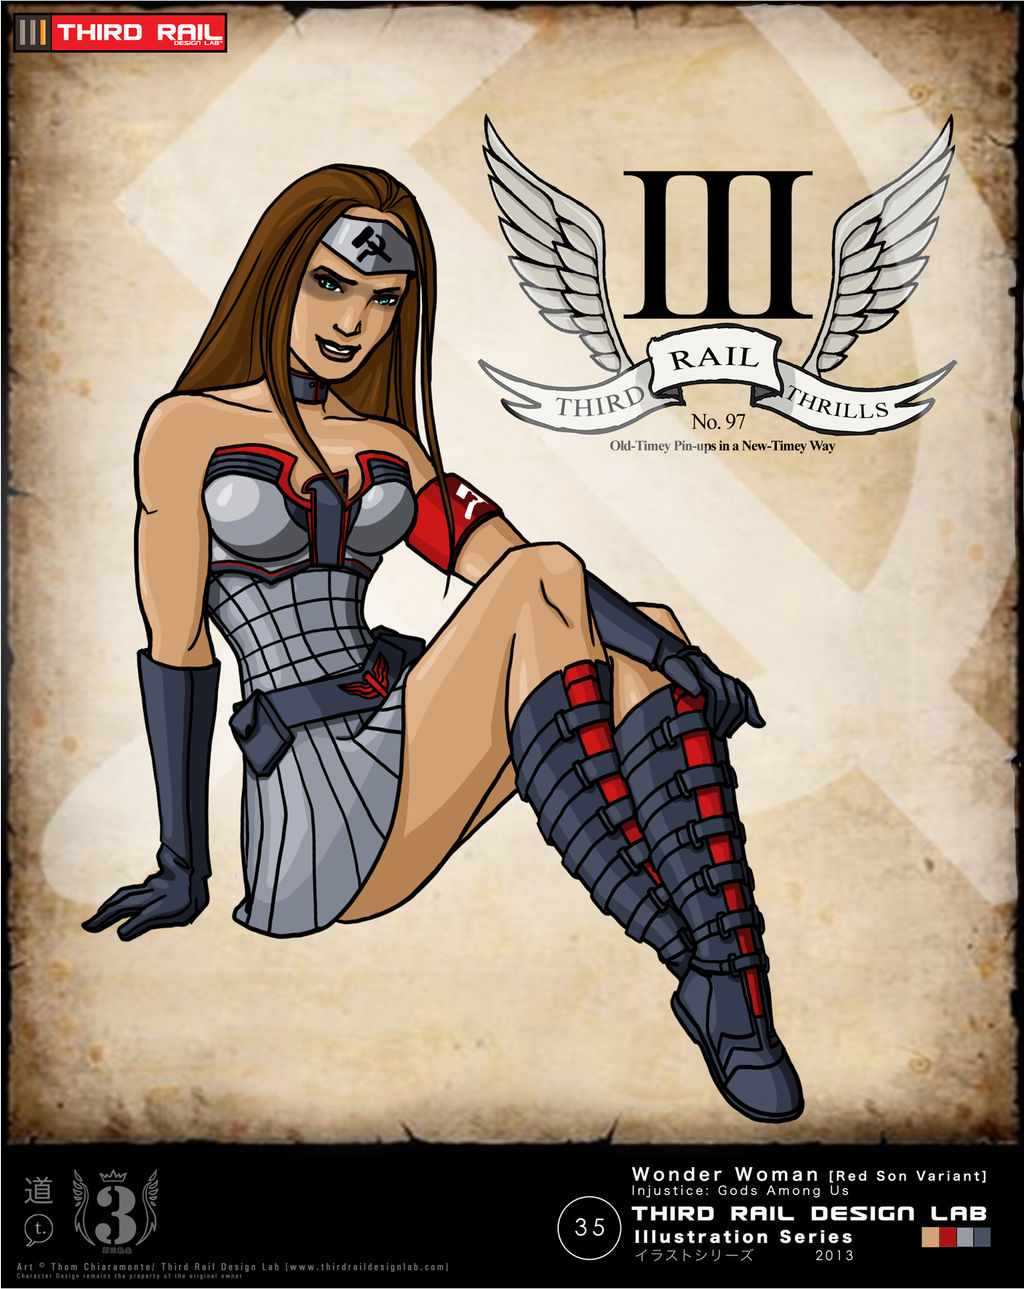 H.O.T Injustice Art Contest Wonder Woman Red Son